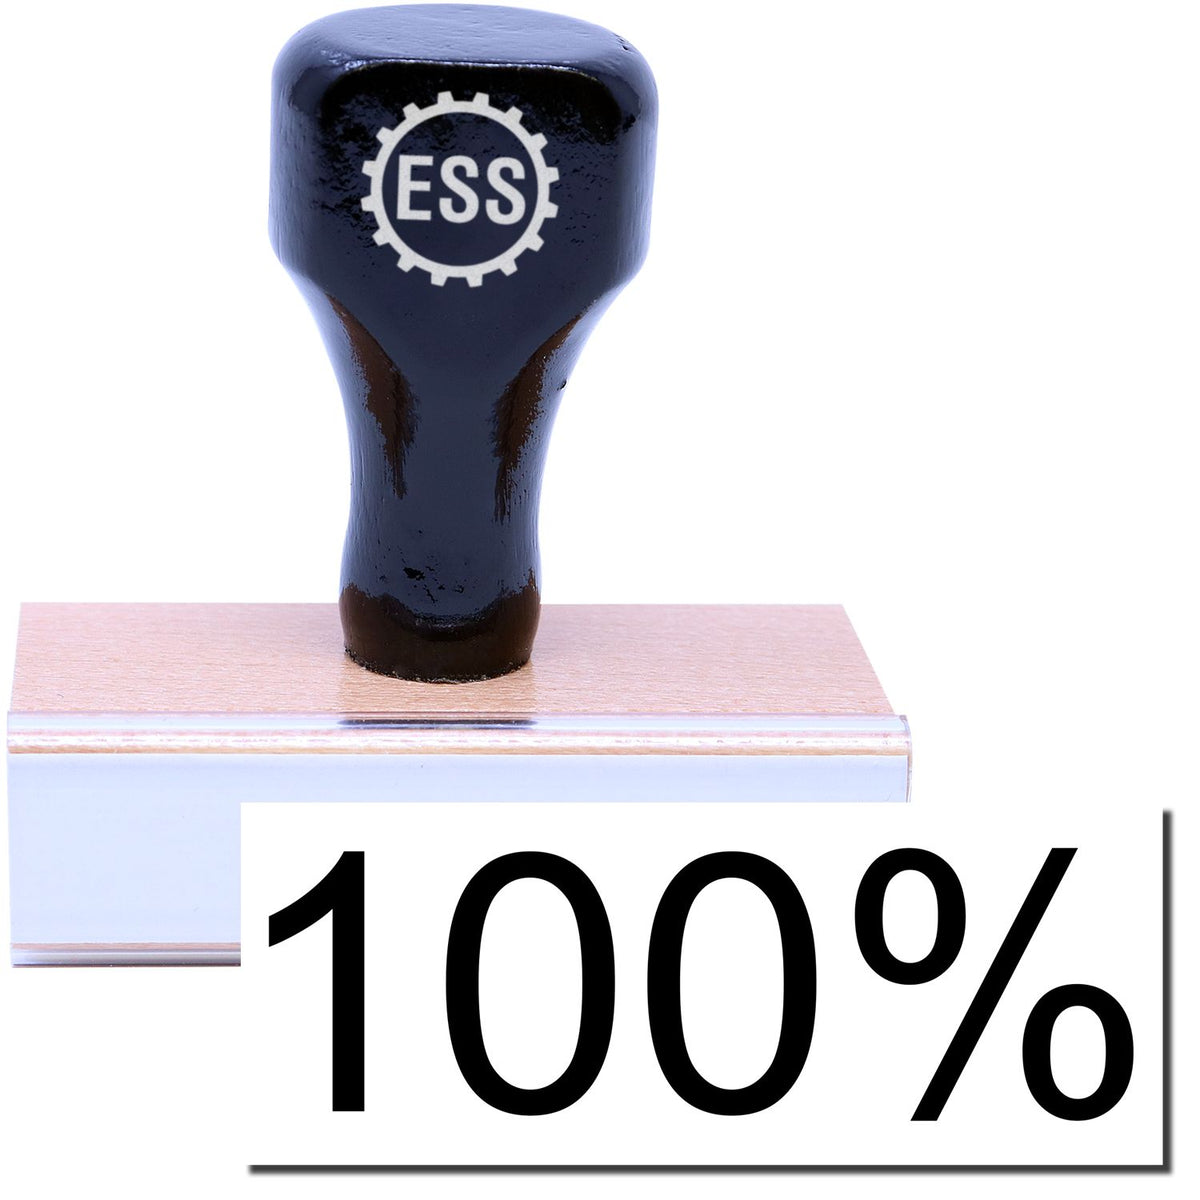 A stock office rubber stamp with a stamped image showing how the text &quot;100%&quot; is displayed after stamping.